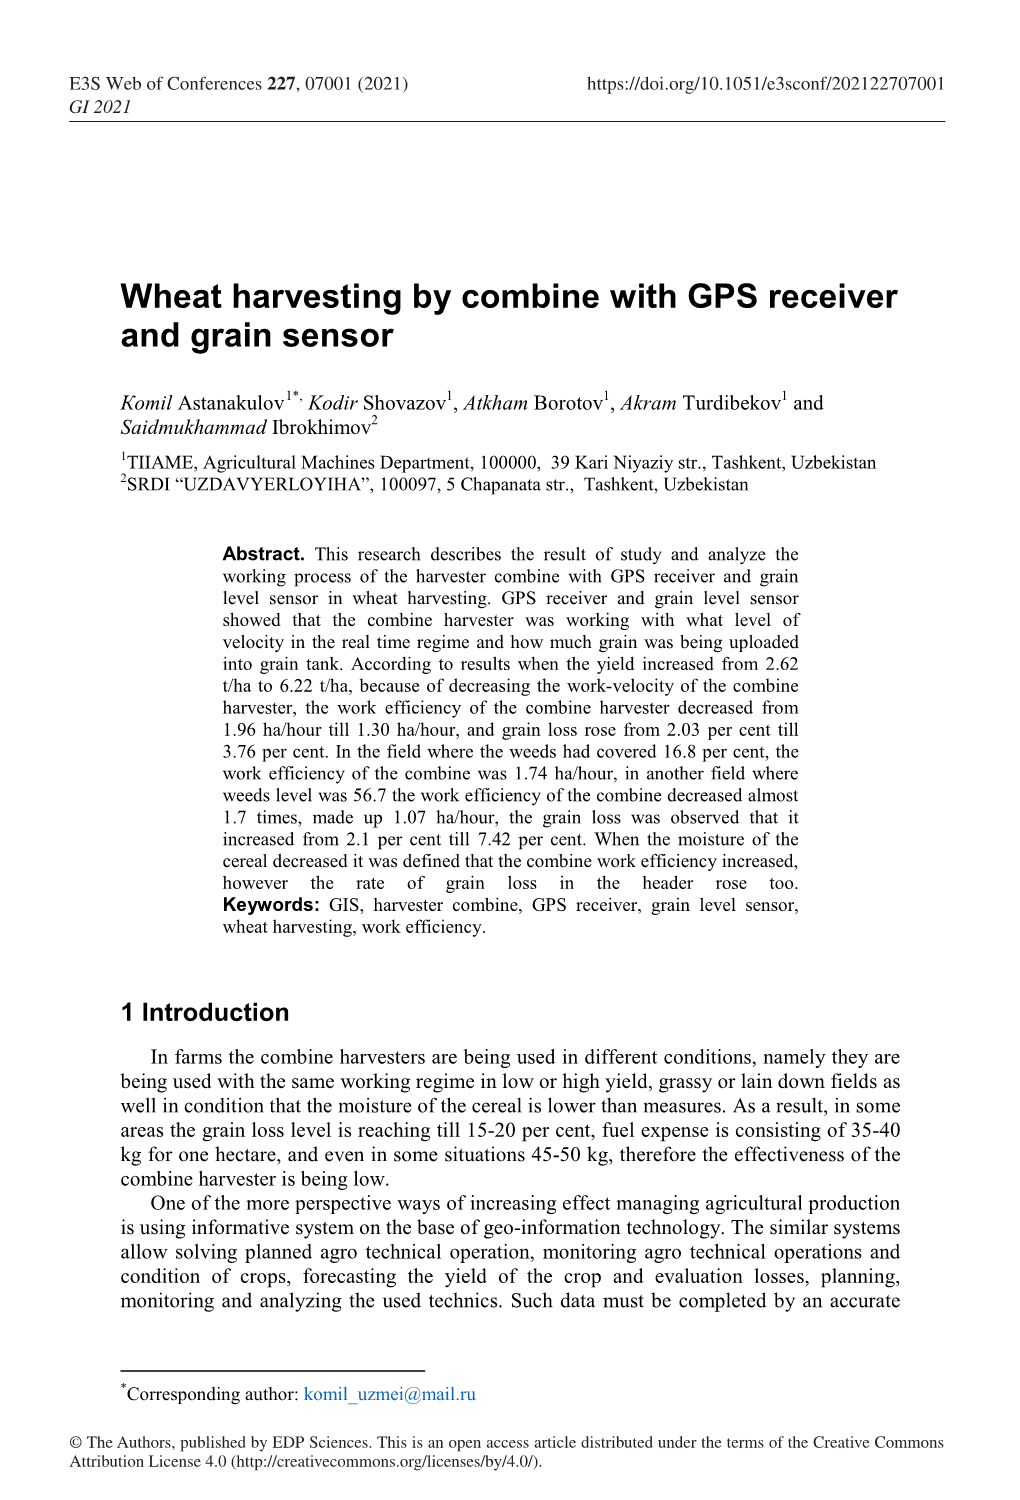 Wheat Harvesting by Combine with GPS Receiver and Grain Sensor